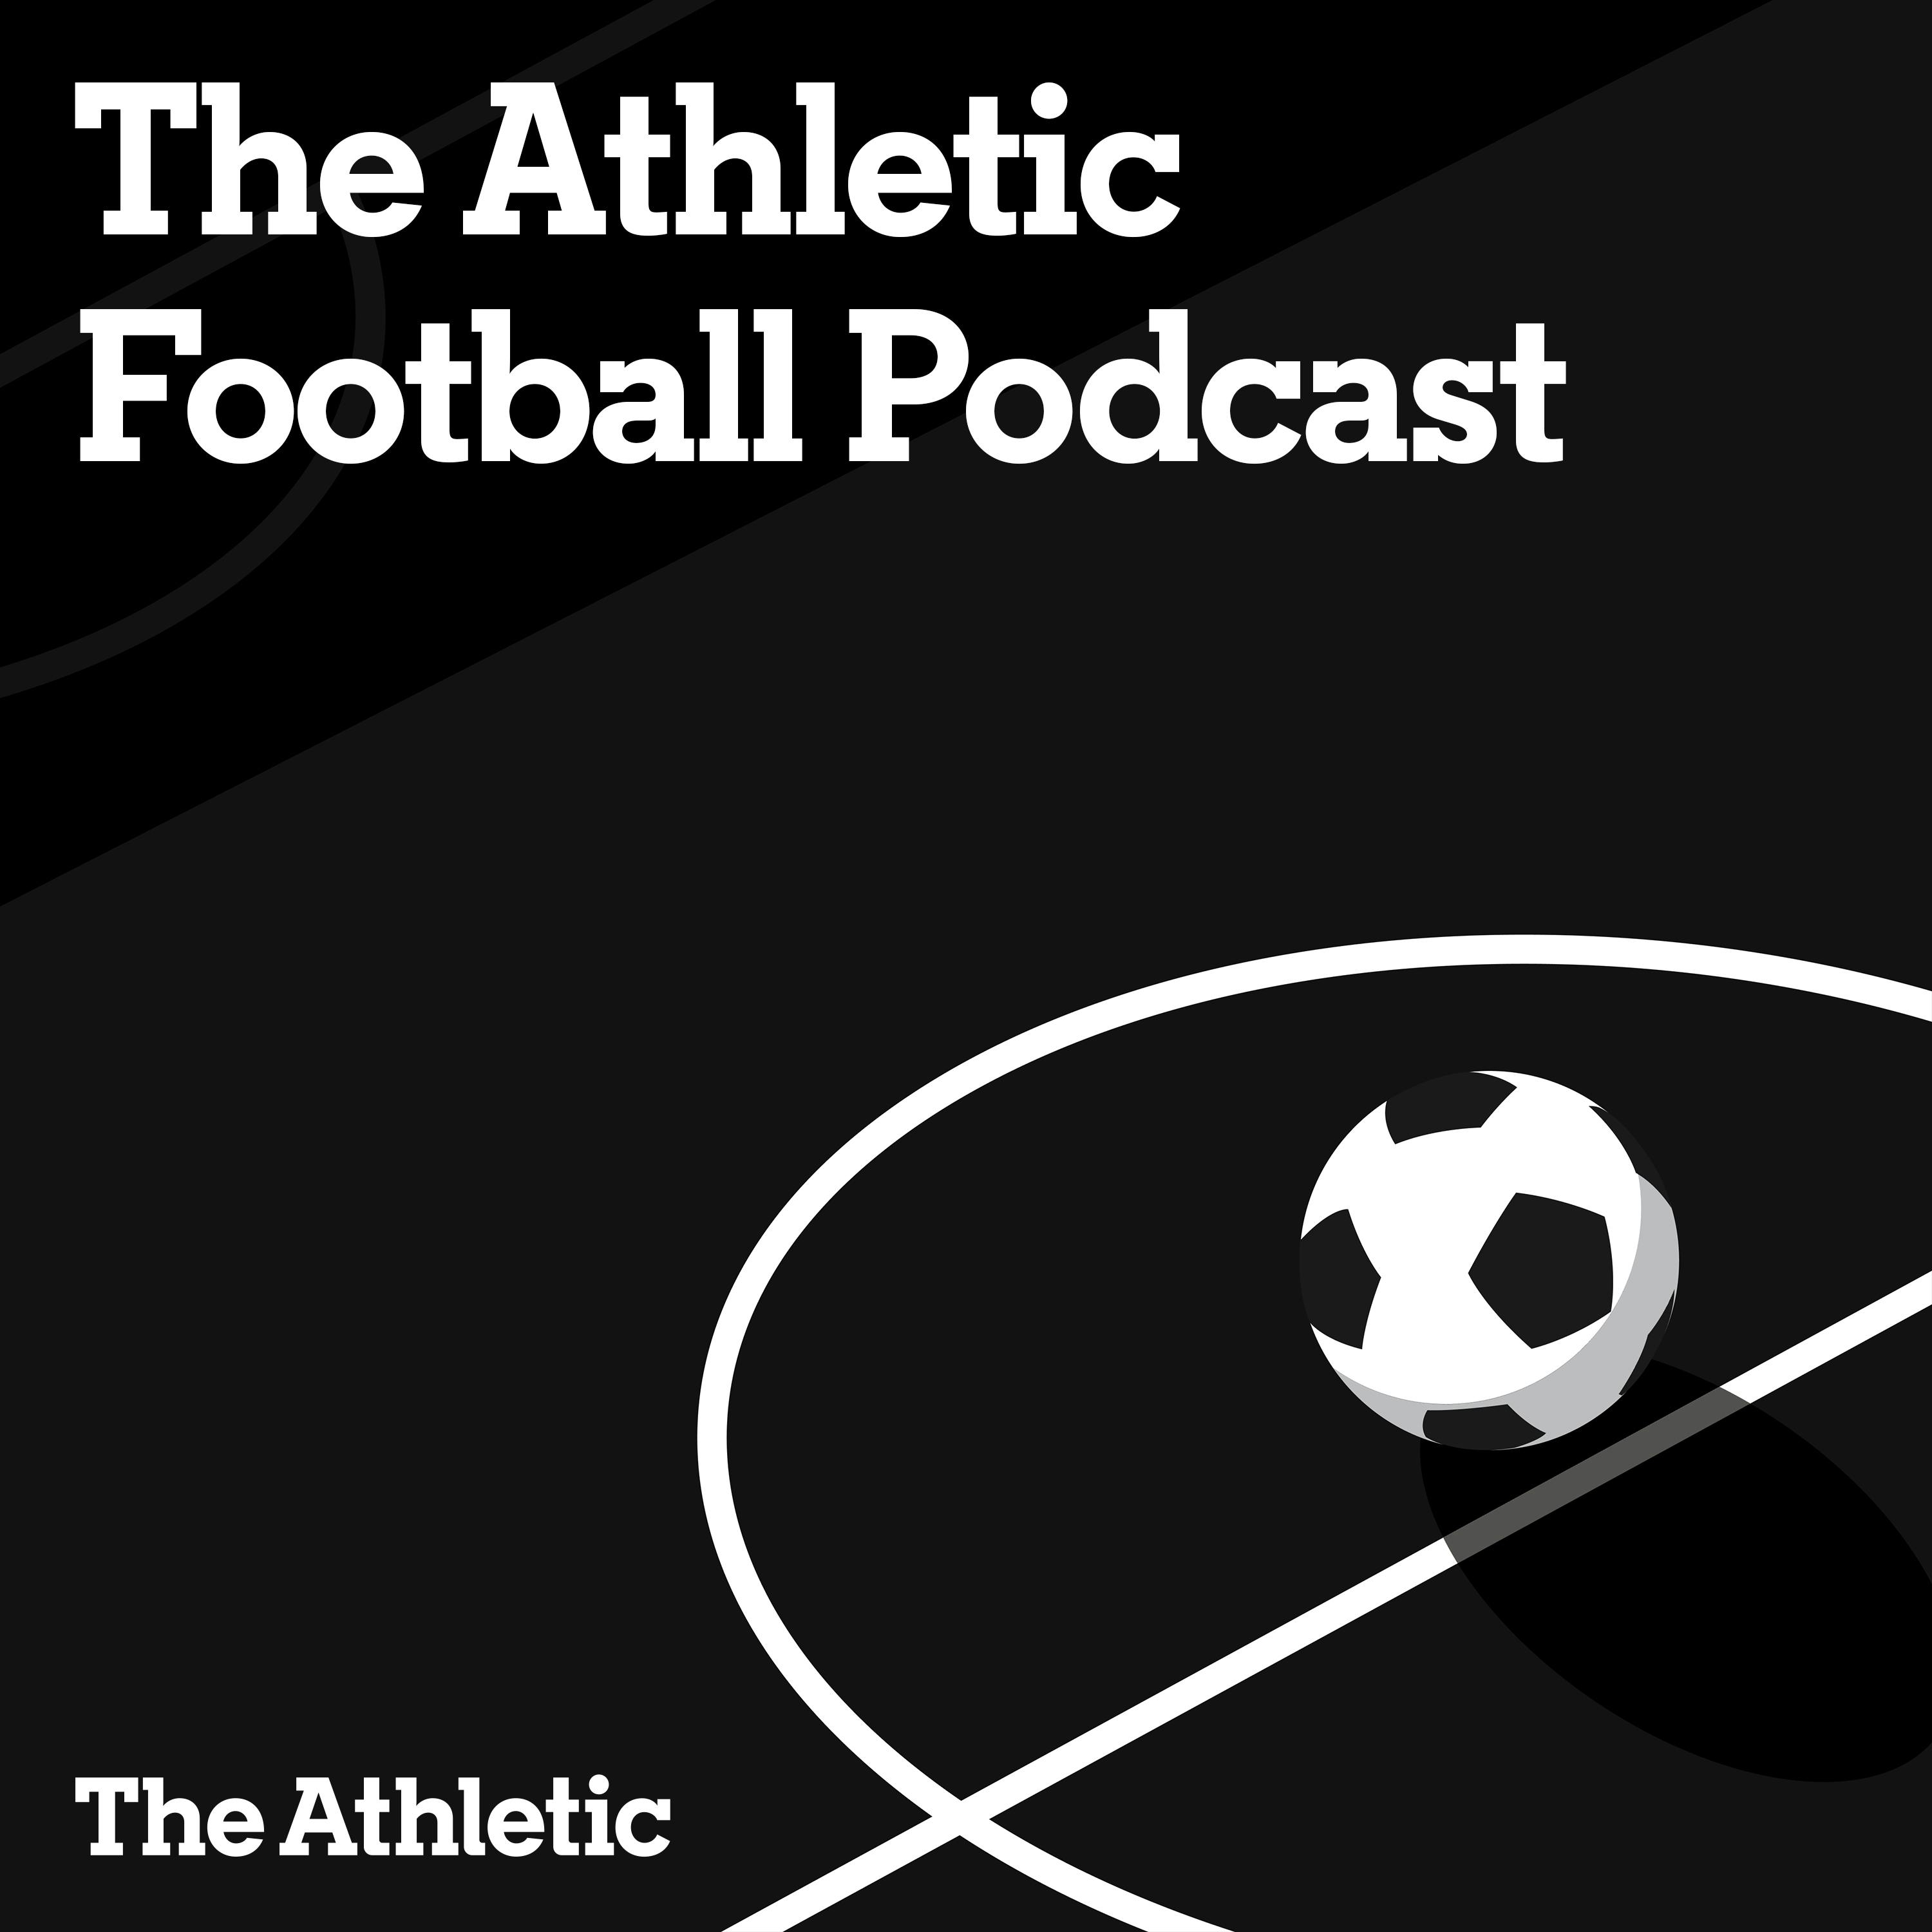 The Athletic Football Podcast podcast